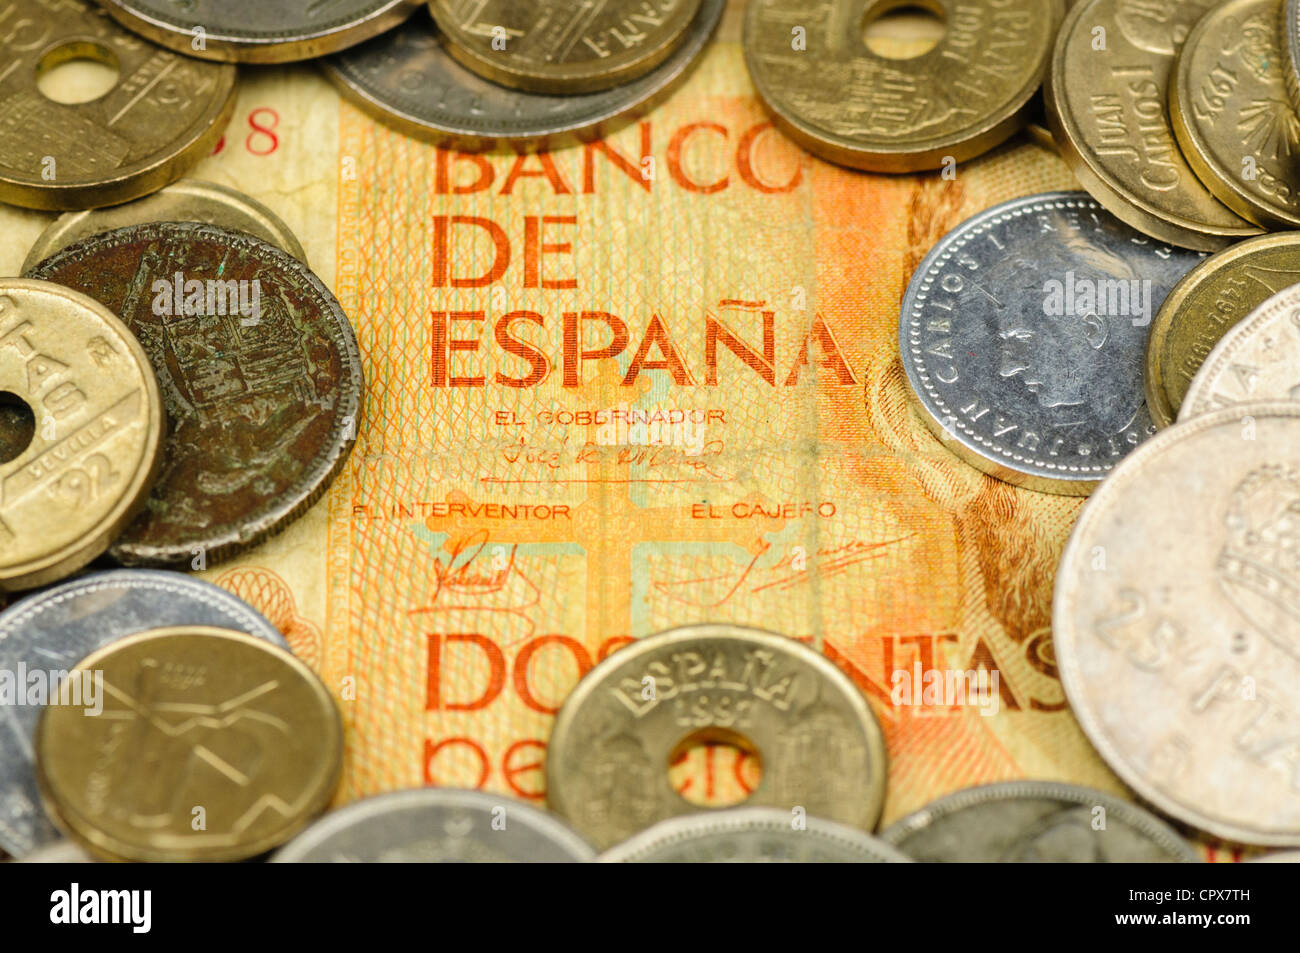 Spanish pesetas bank note and coins Stock Photo